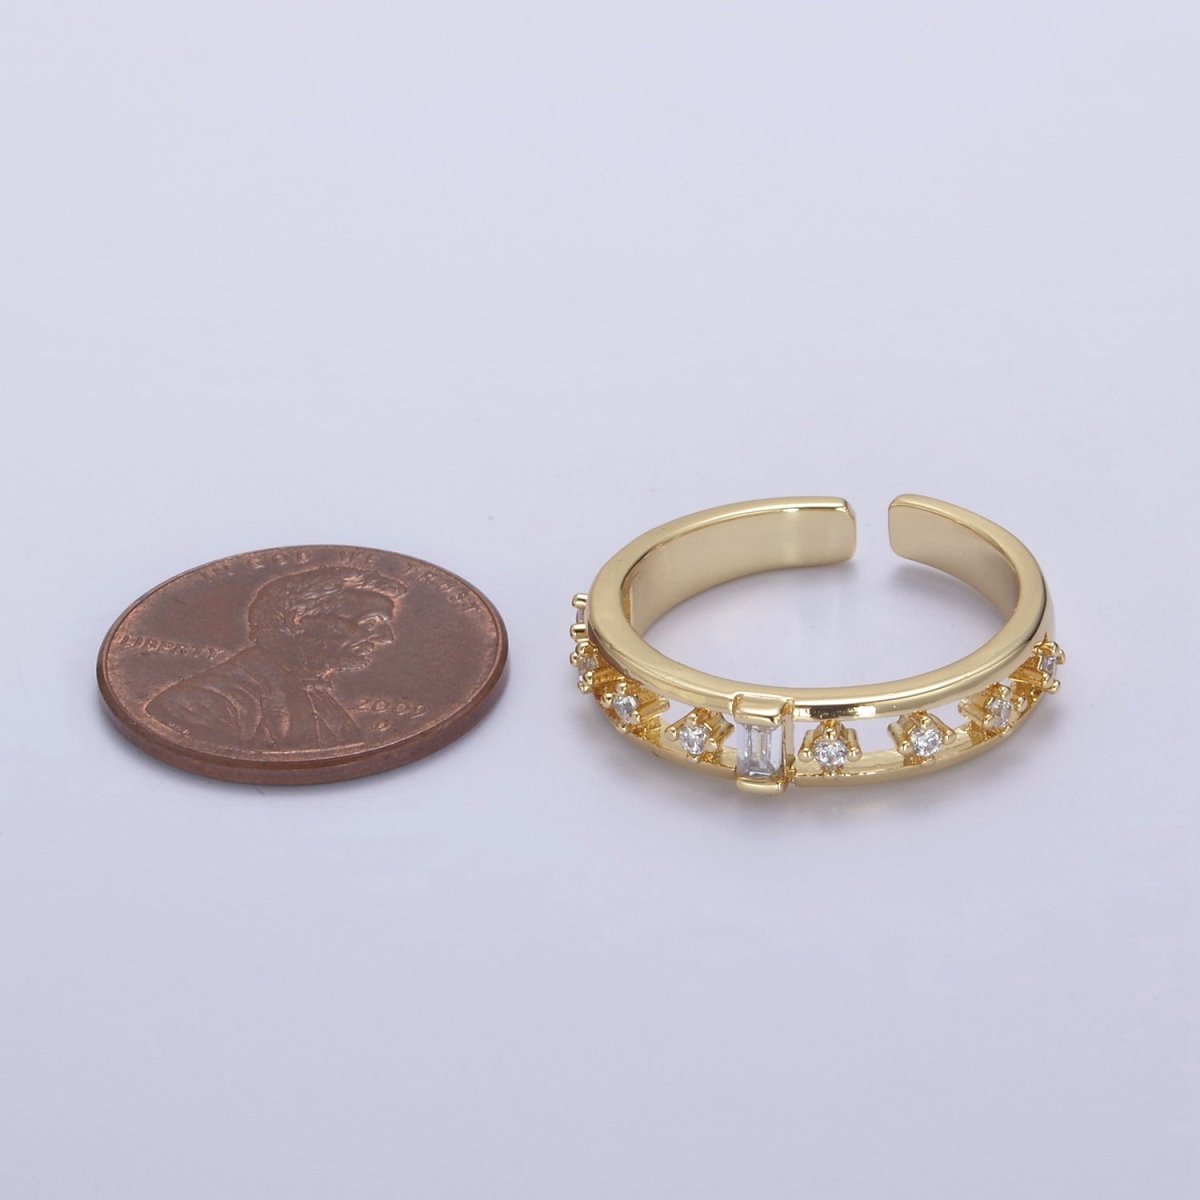 Minimalist Cz Open Adjustable Ring In 14k Gold Filled for Stackable Jewelry U-323 - DLUXCA